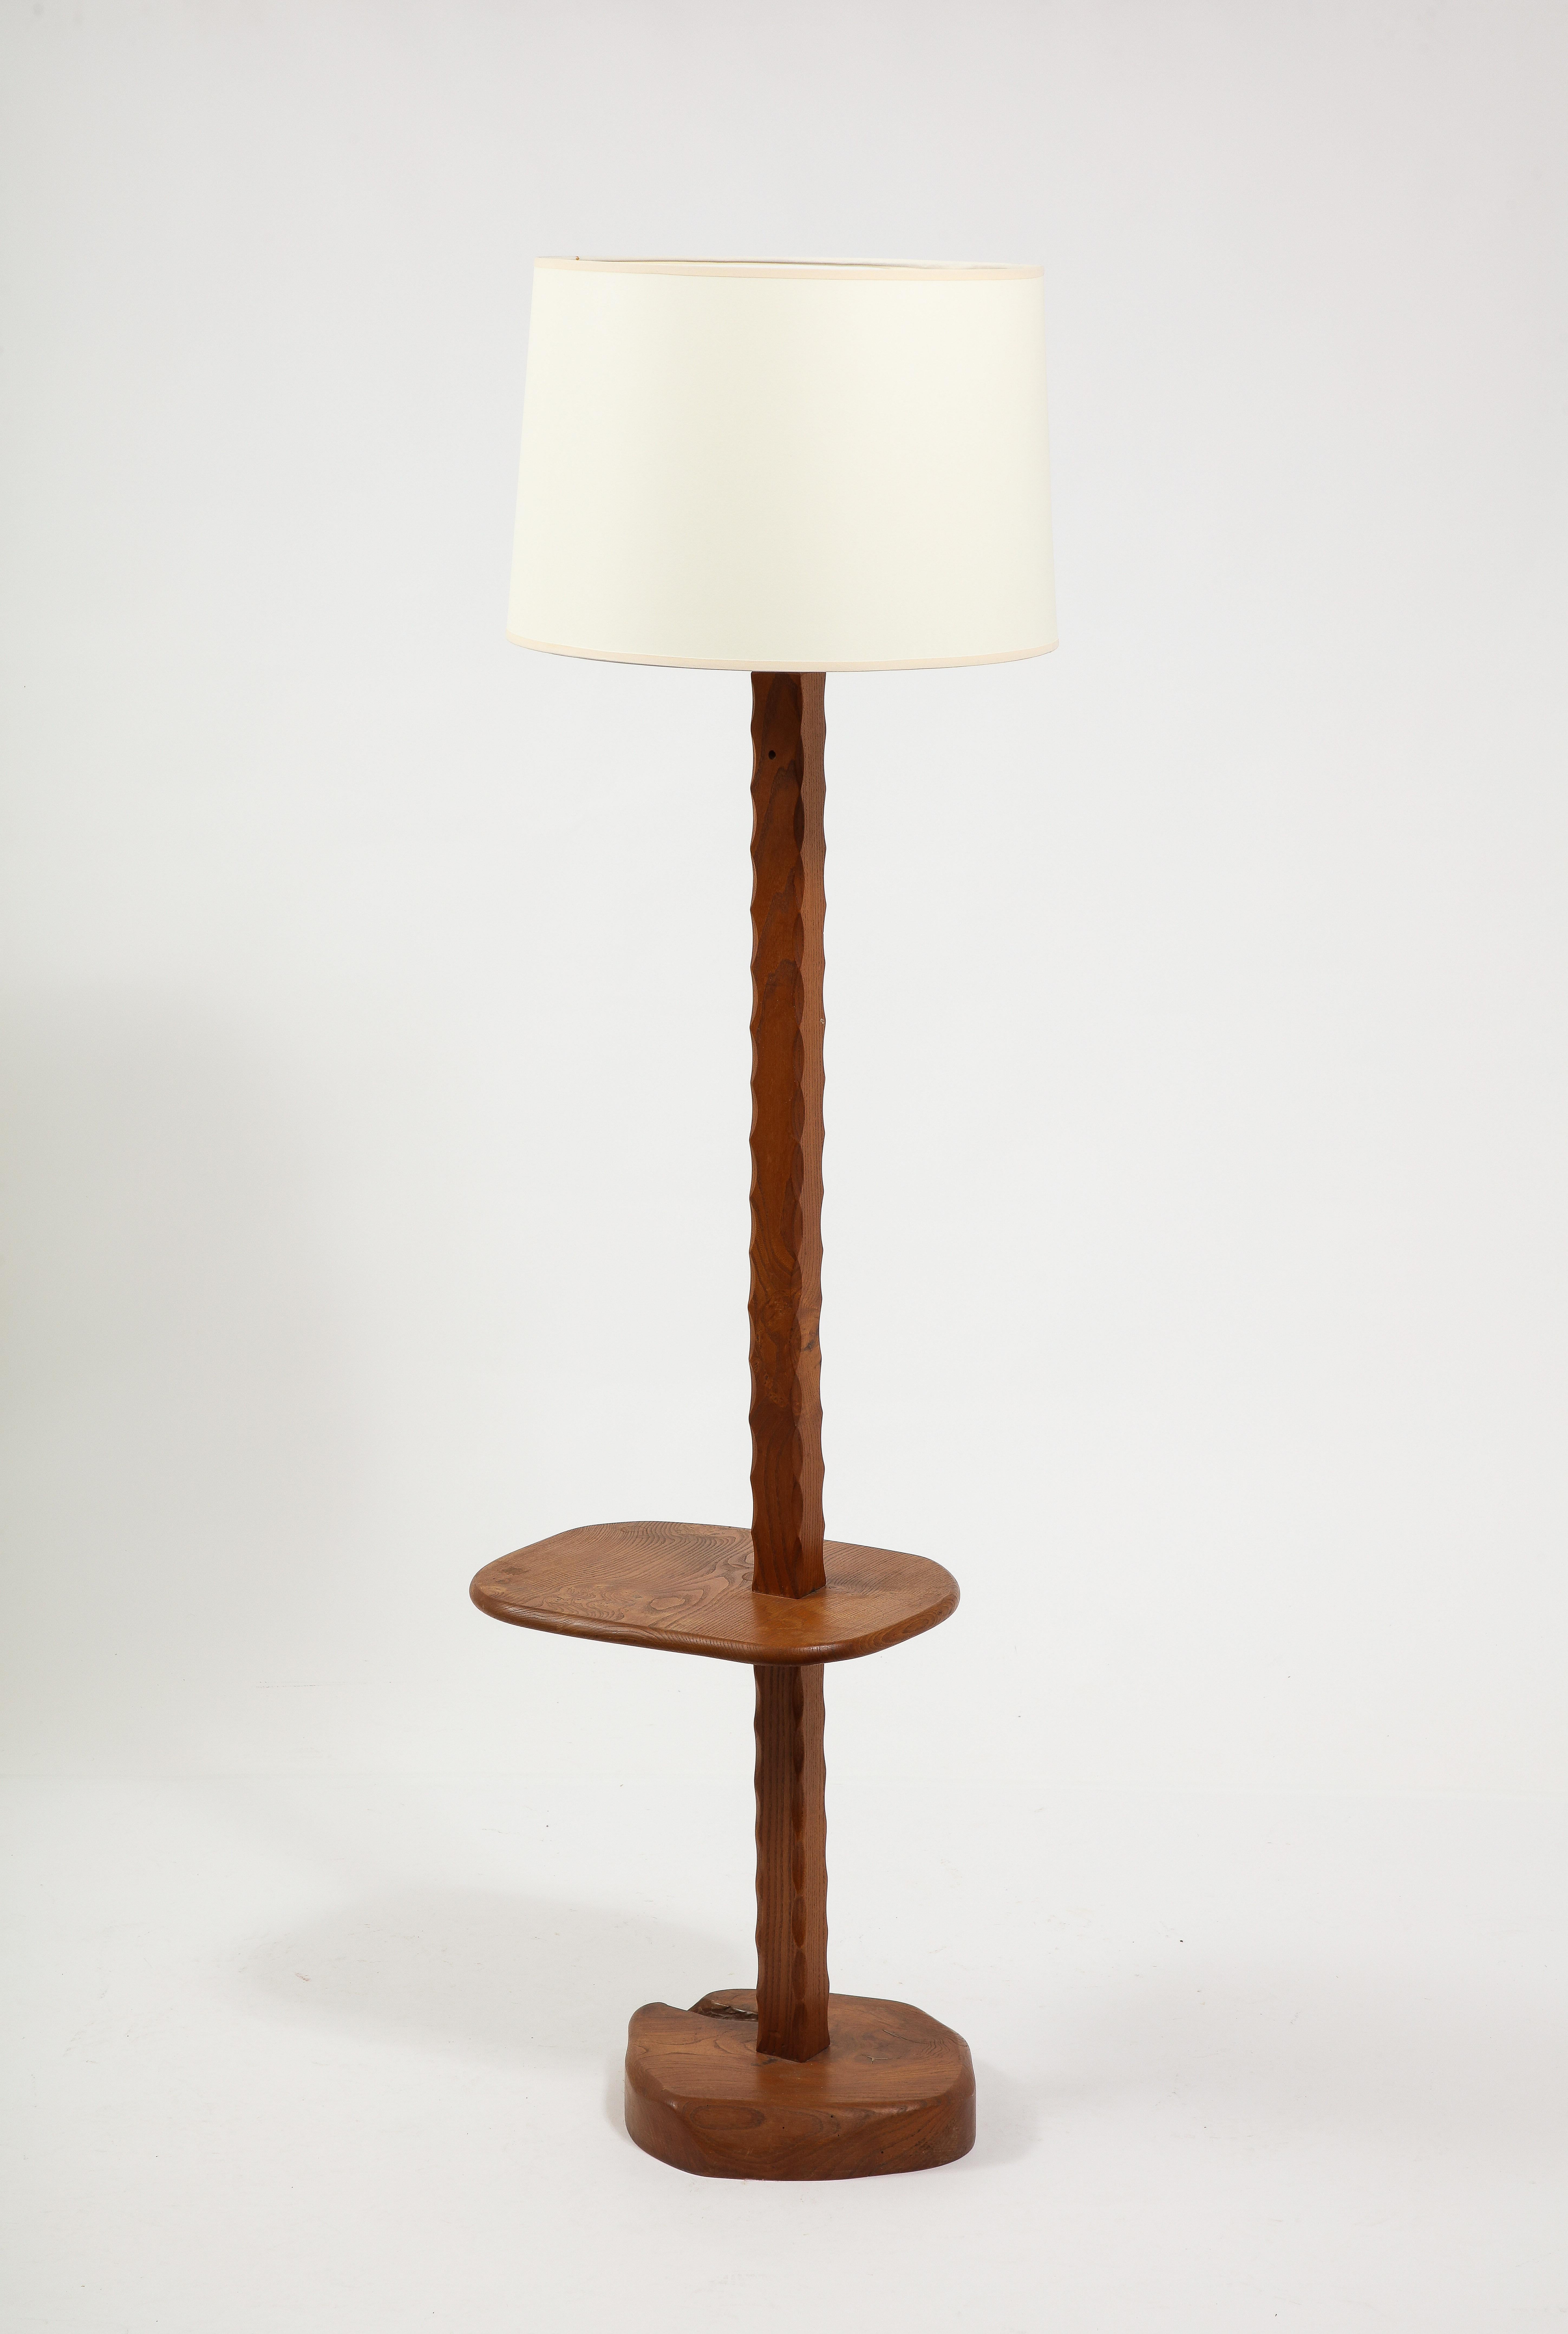 Solid Elm Floor Lamp With Shelf, France 1950's For Sale 6